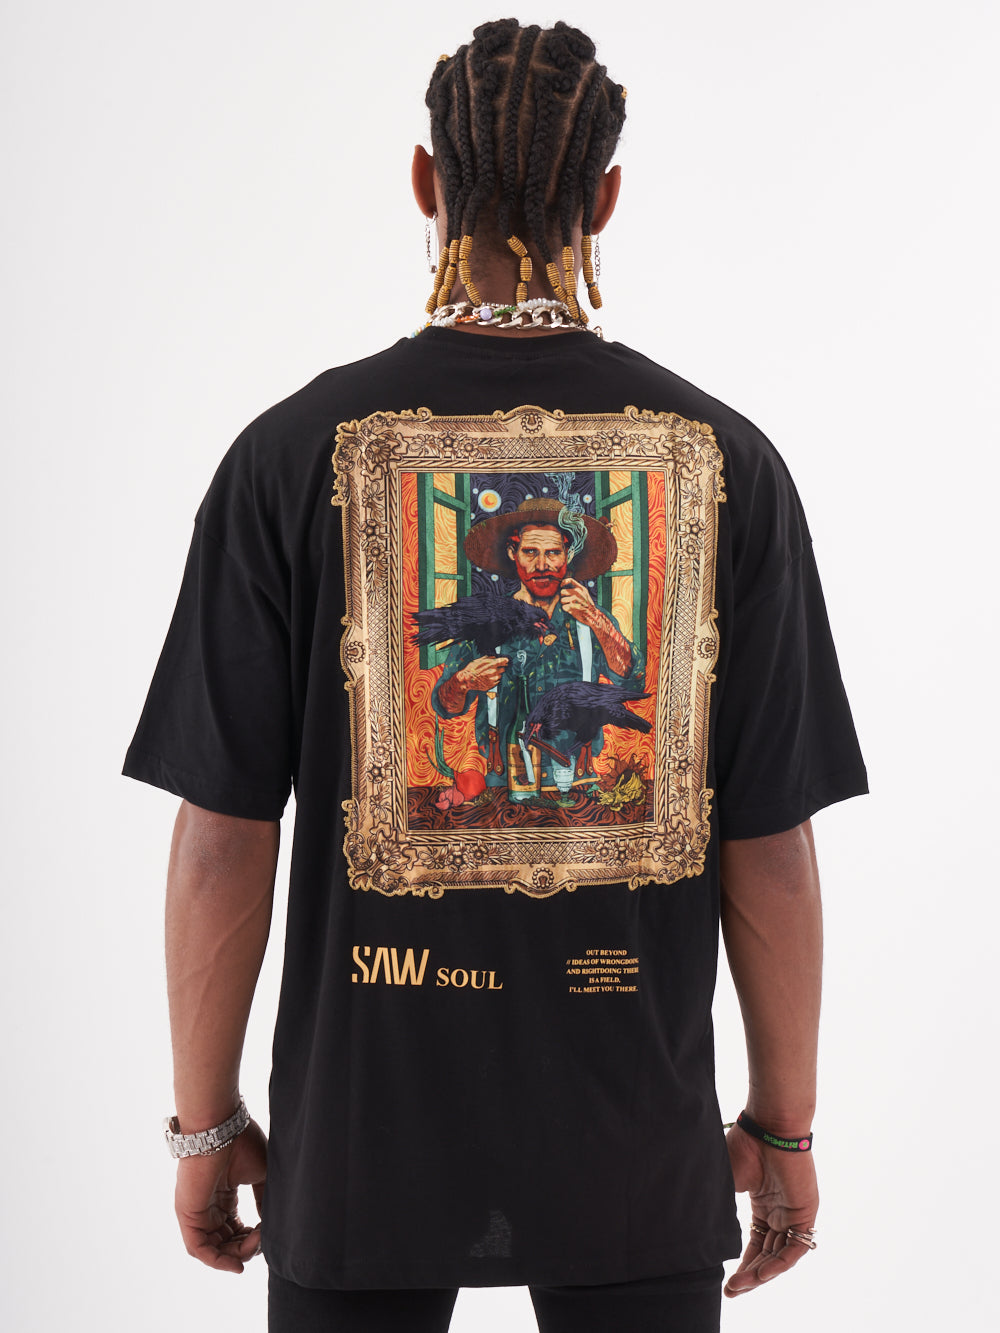 The back of a man wearing a black VINCENT T-SHIRT with a painting on it.